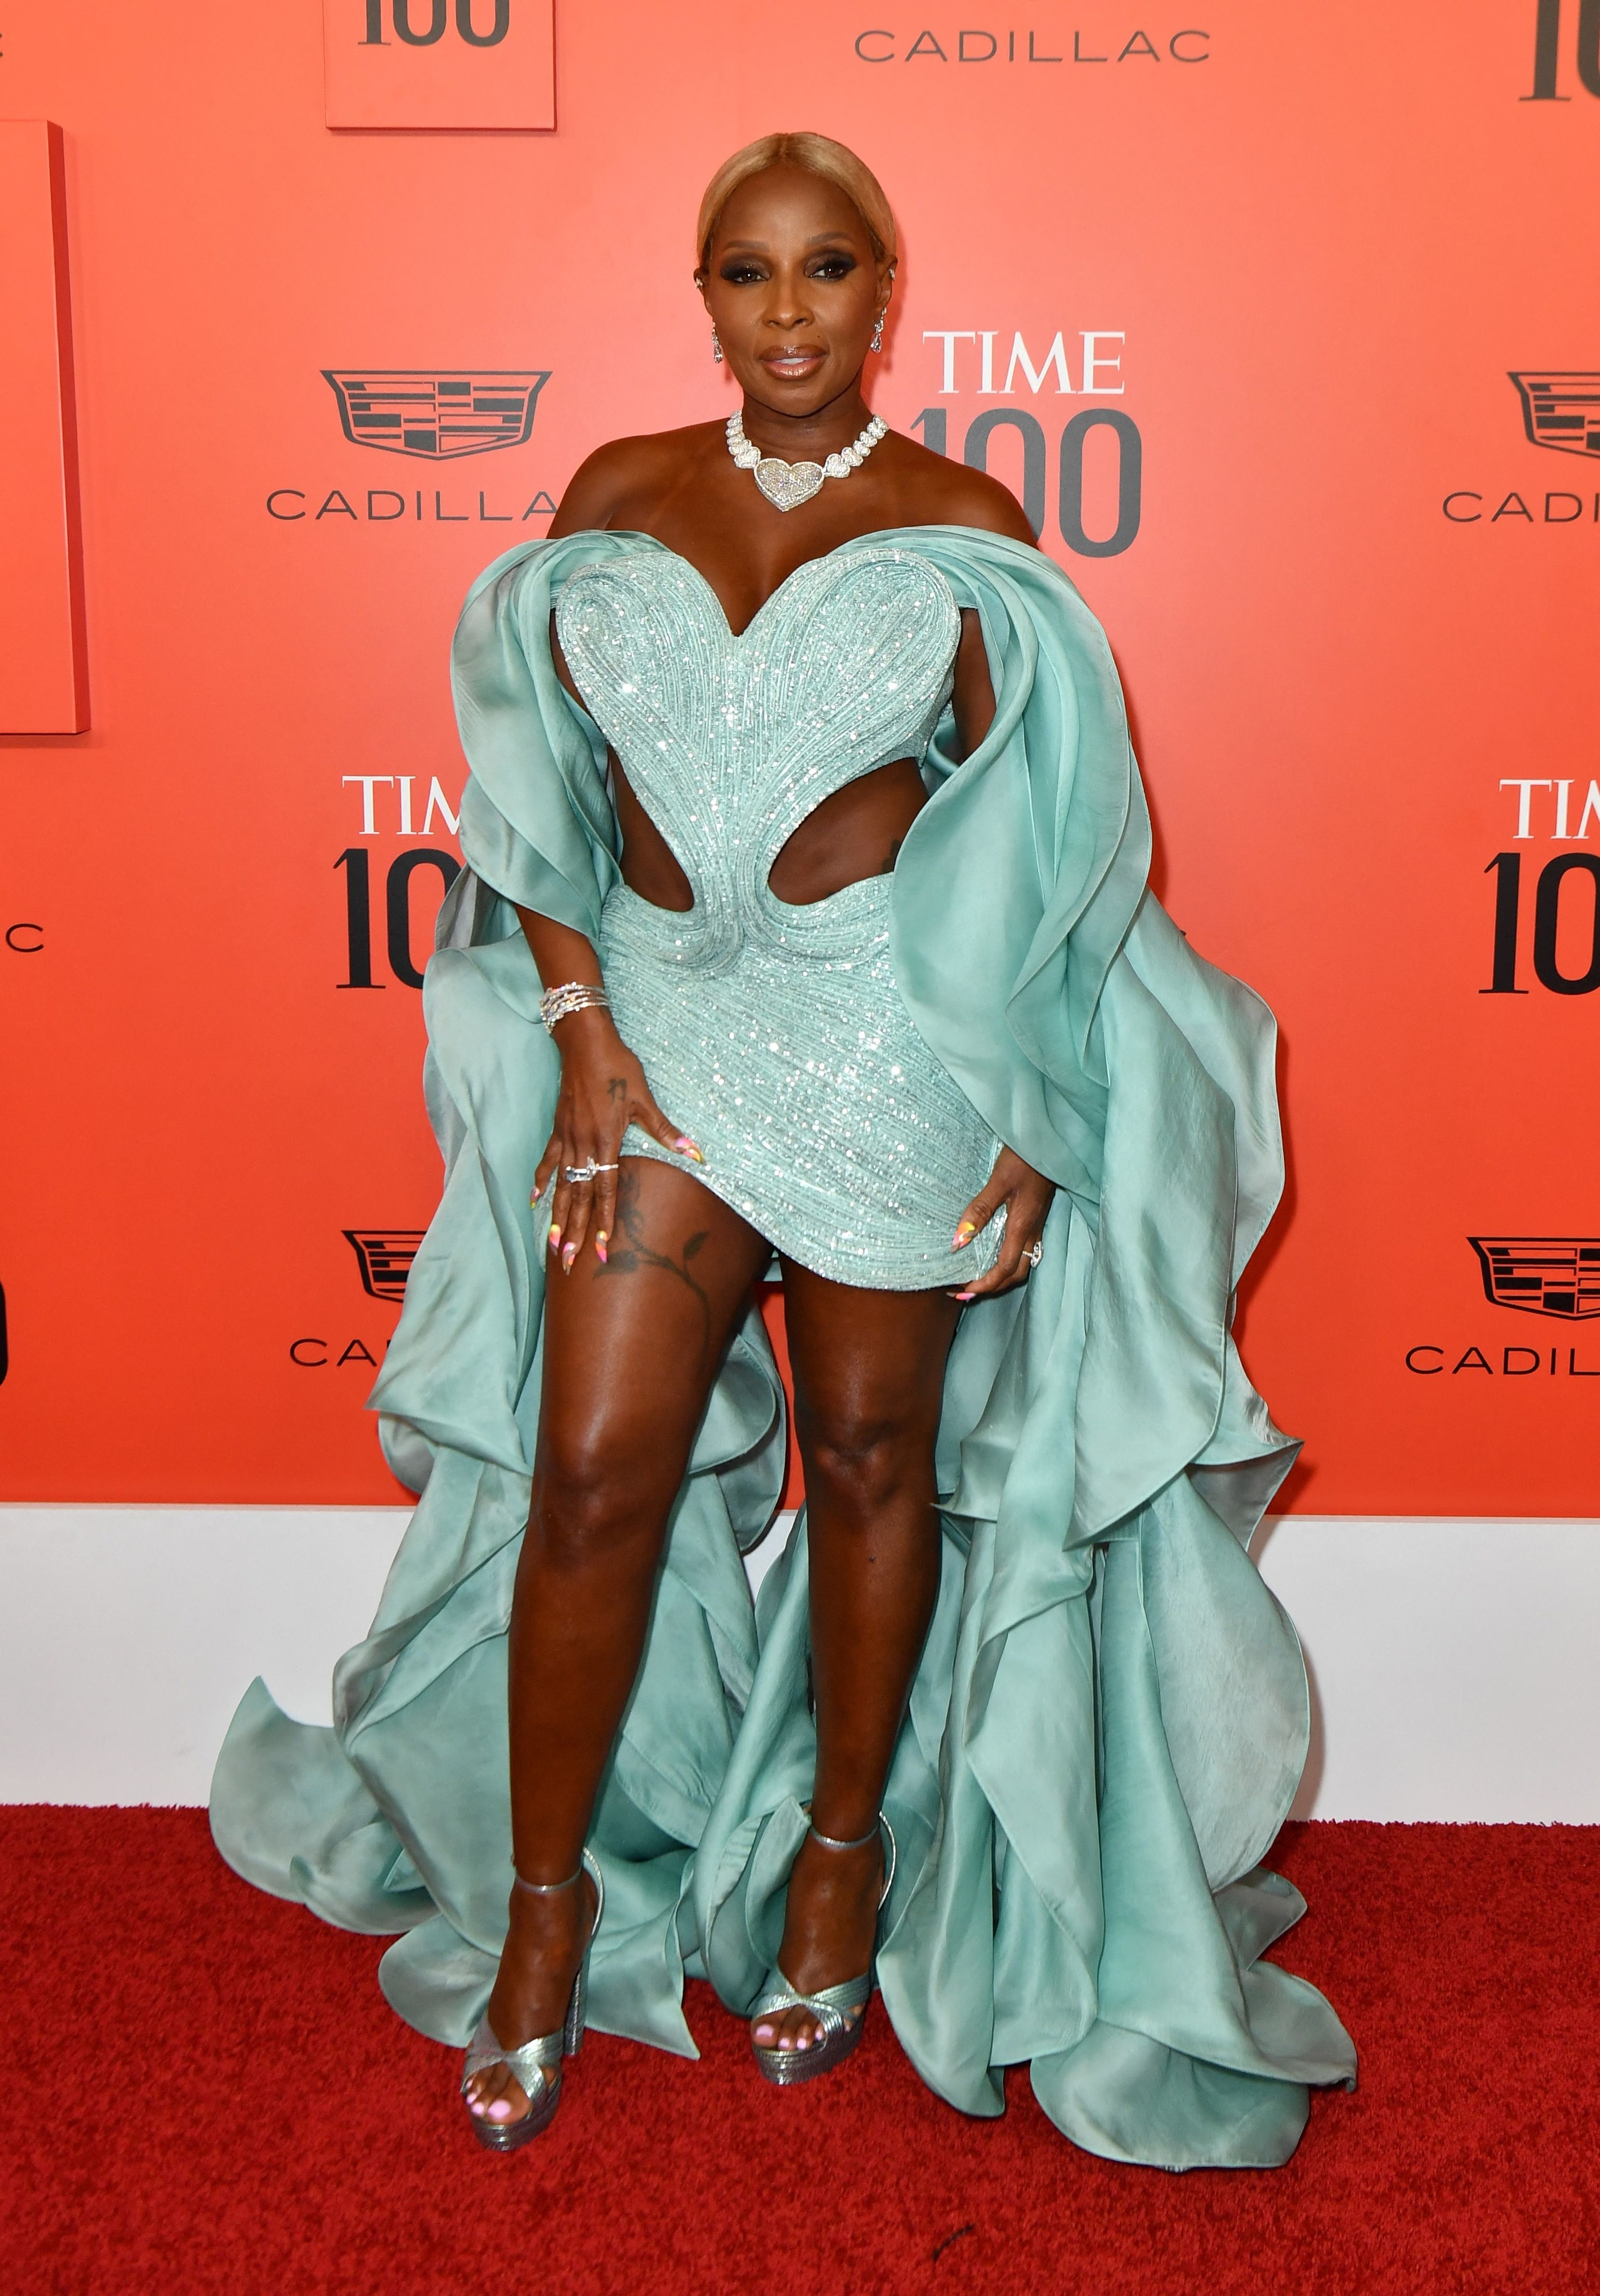 Mary J. Blige attends the 2022 Time 100 Gala in a short strapless gown that has sculptural sleeves that flow down her arms in waves